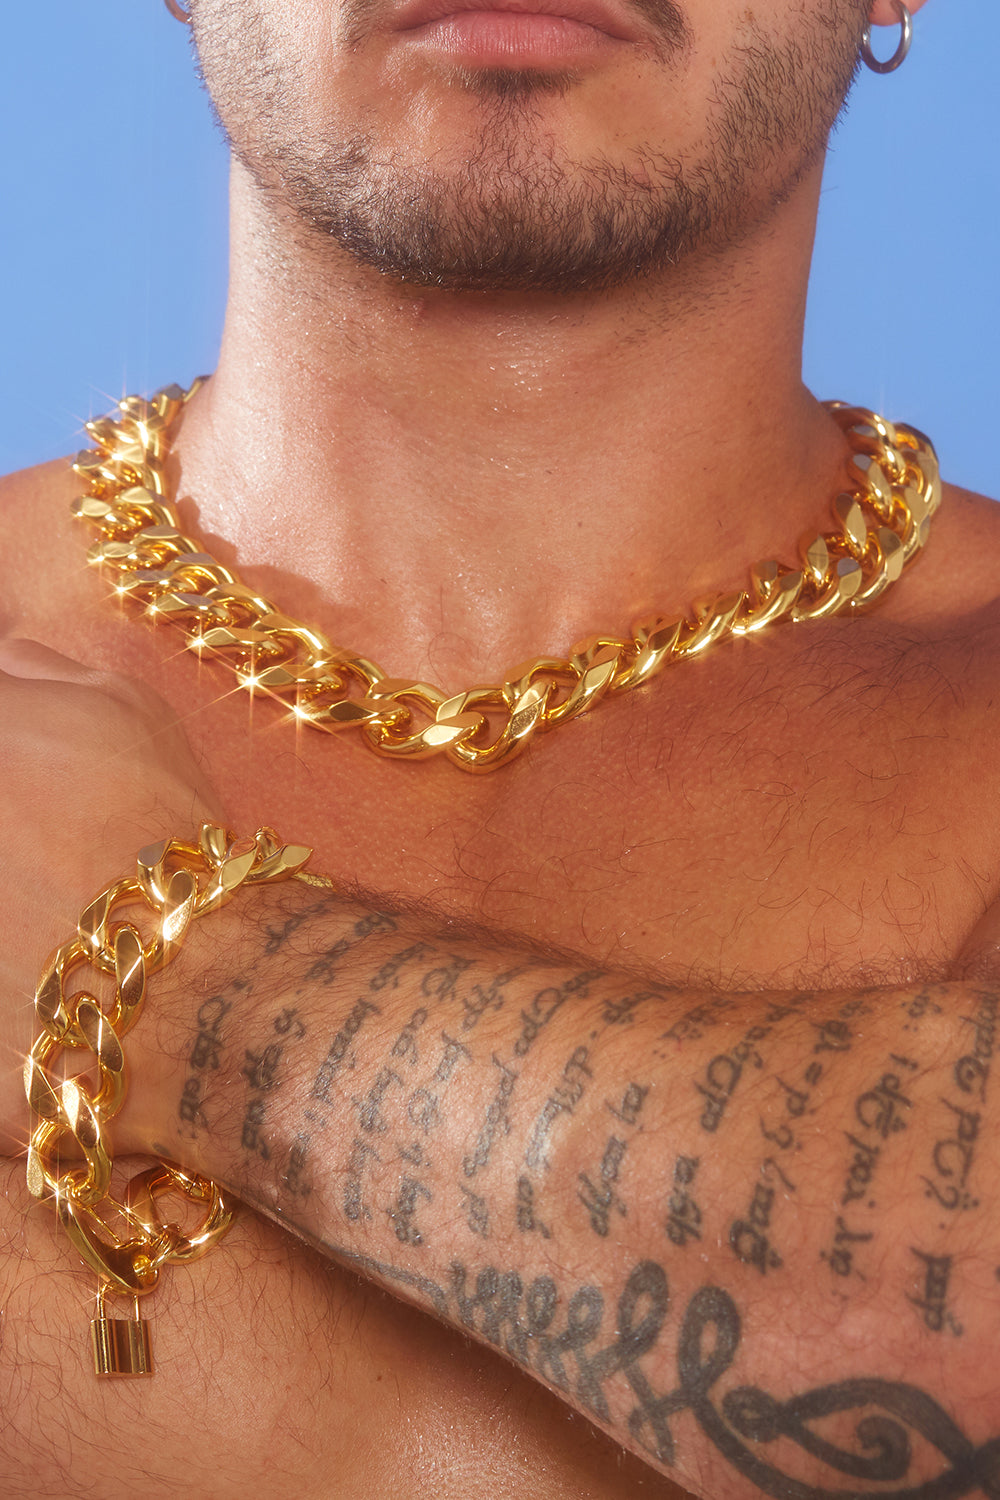 Super Heavy Weight 18 Karat Gold Plated Stainless Steel Chain and Bracelet Set (10% discount on set) - Slick It Up 